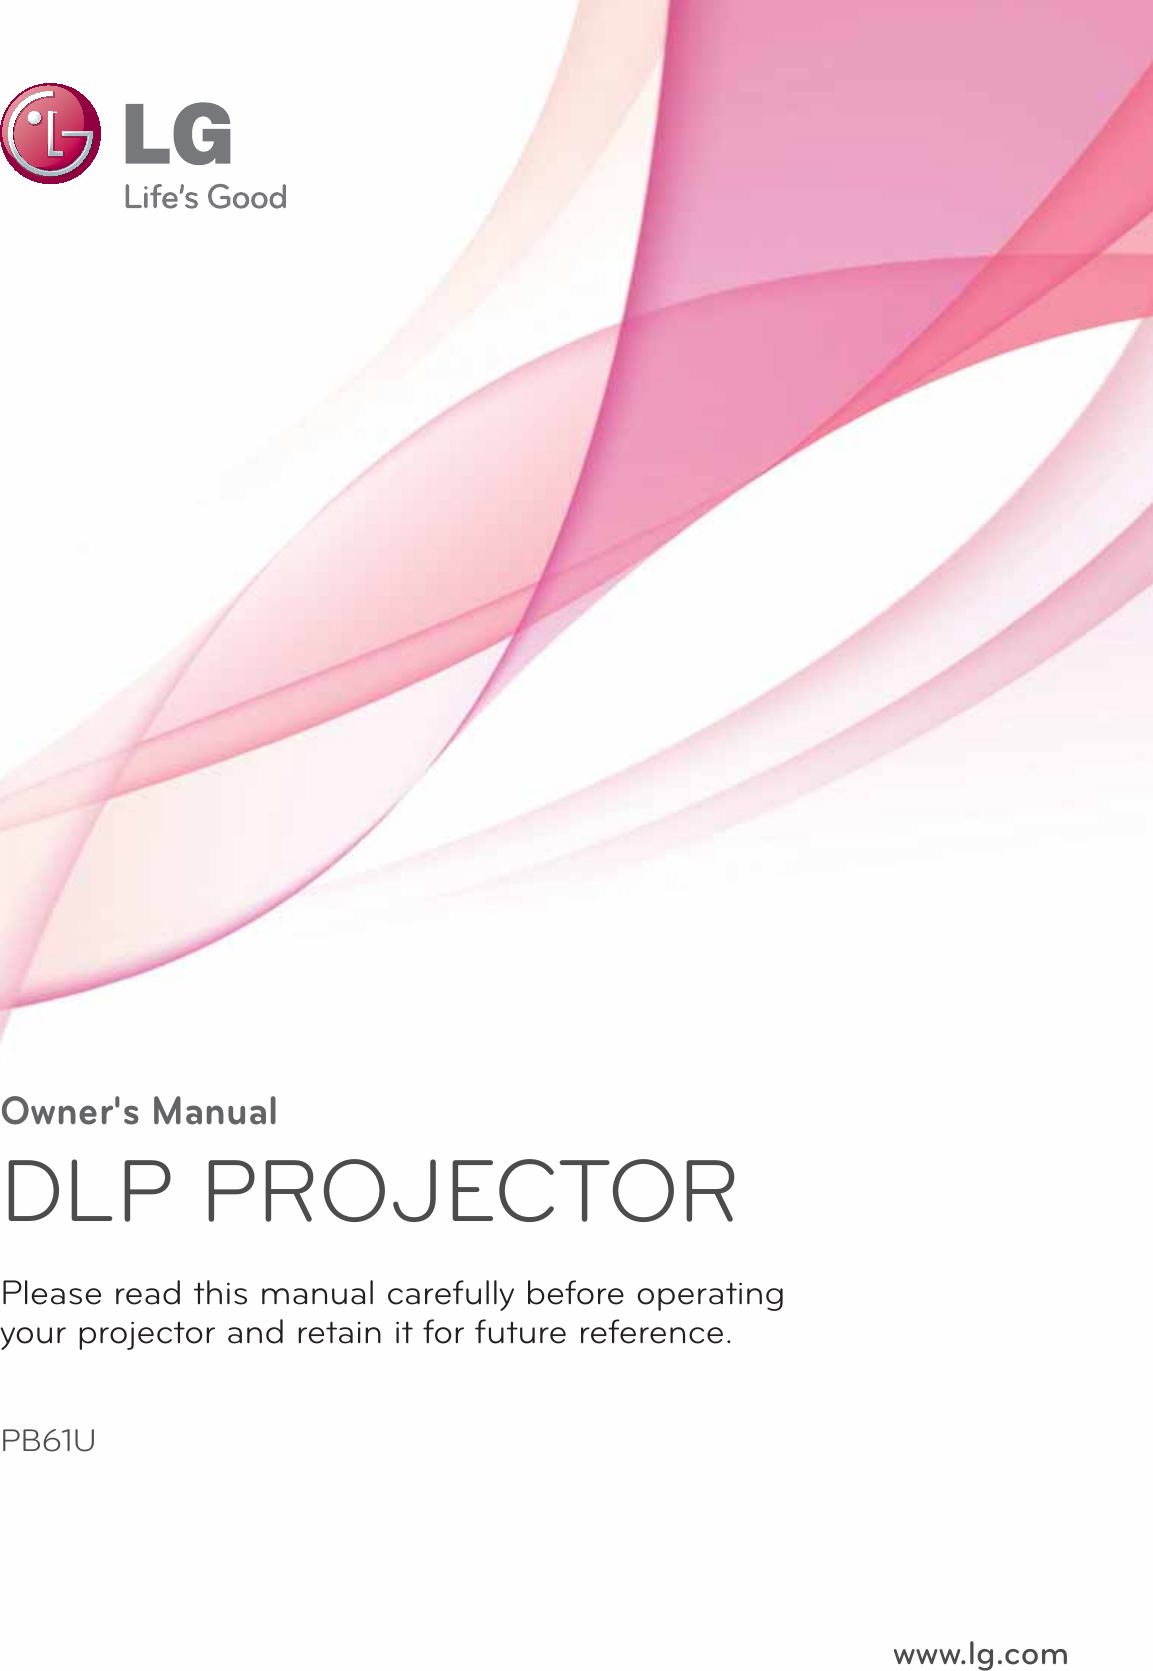 Owner&apos;s ManualDLP PROJECTORPB61UPlease read this manual carefully before operatingyour projector and retain it for future reference.www.lg.com